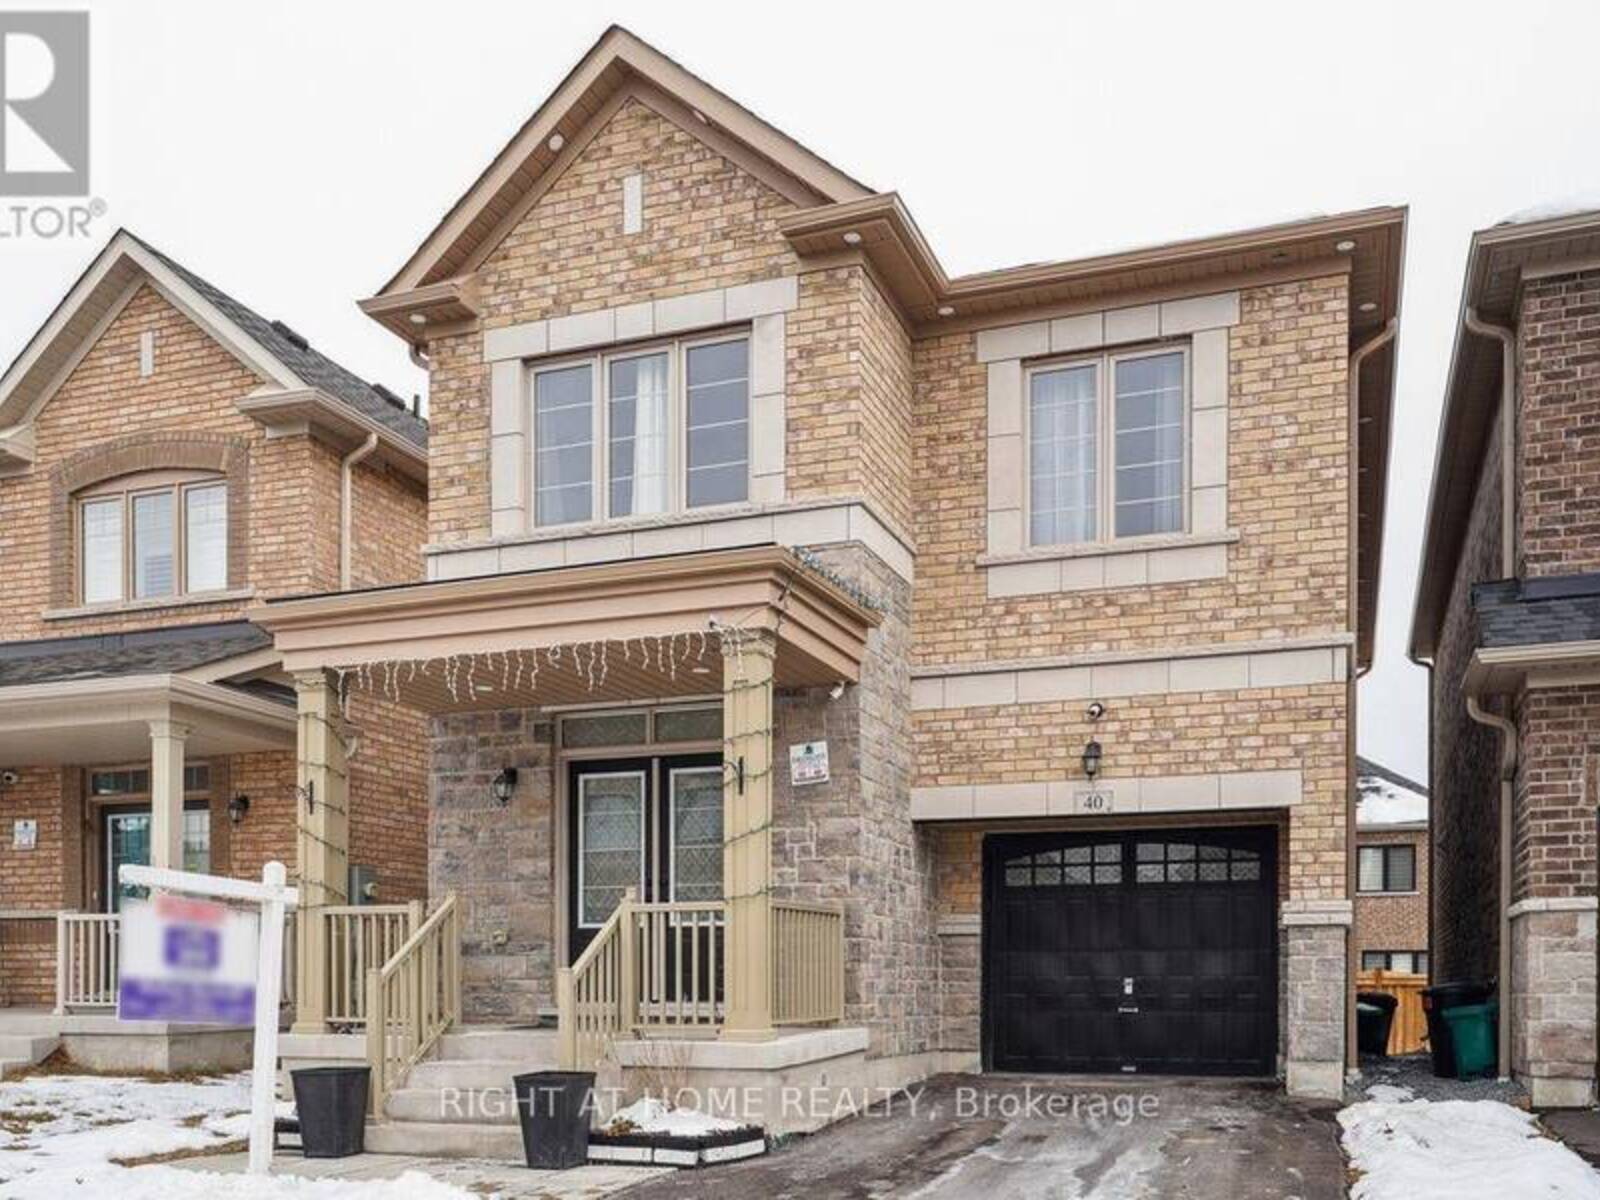 40 WALTER CLIFFORD NESB DRIVE, Whitby, Ontario L1P 0G5